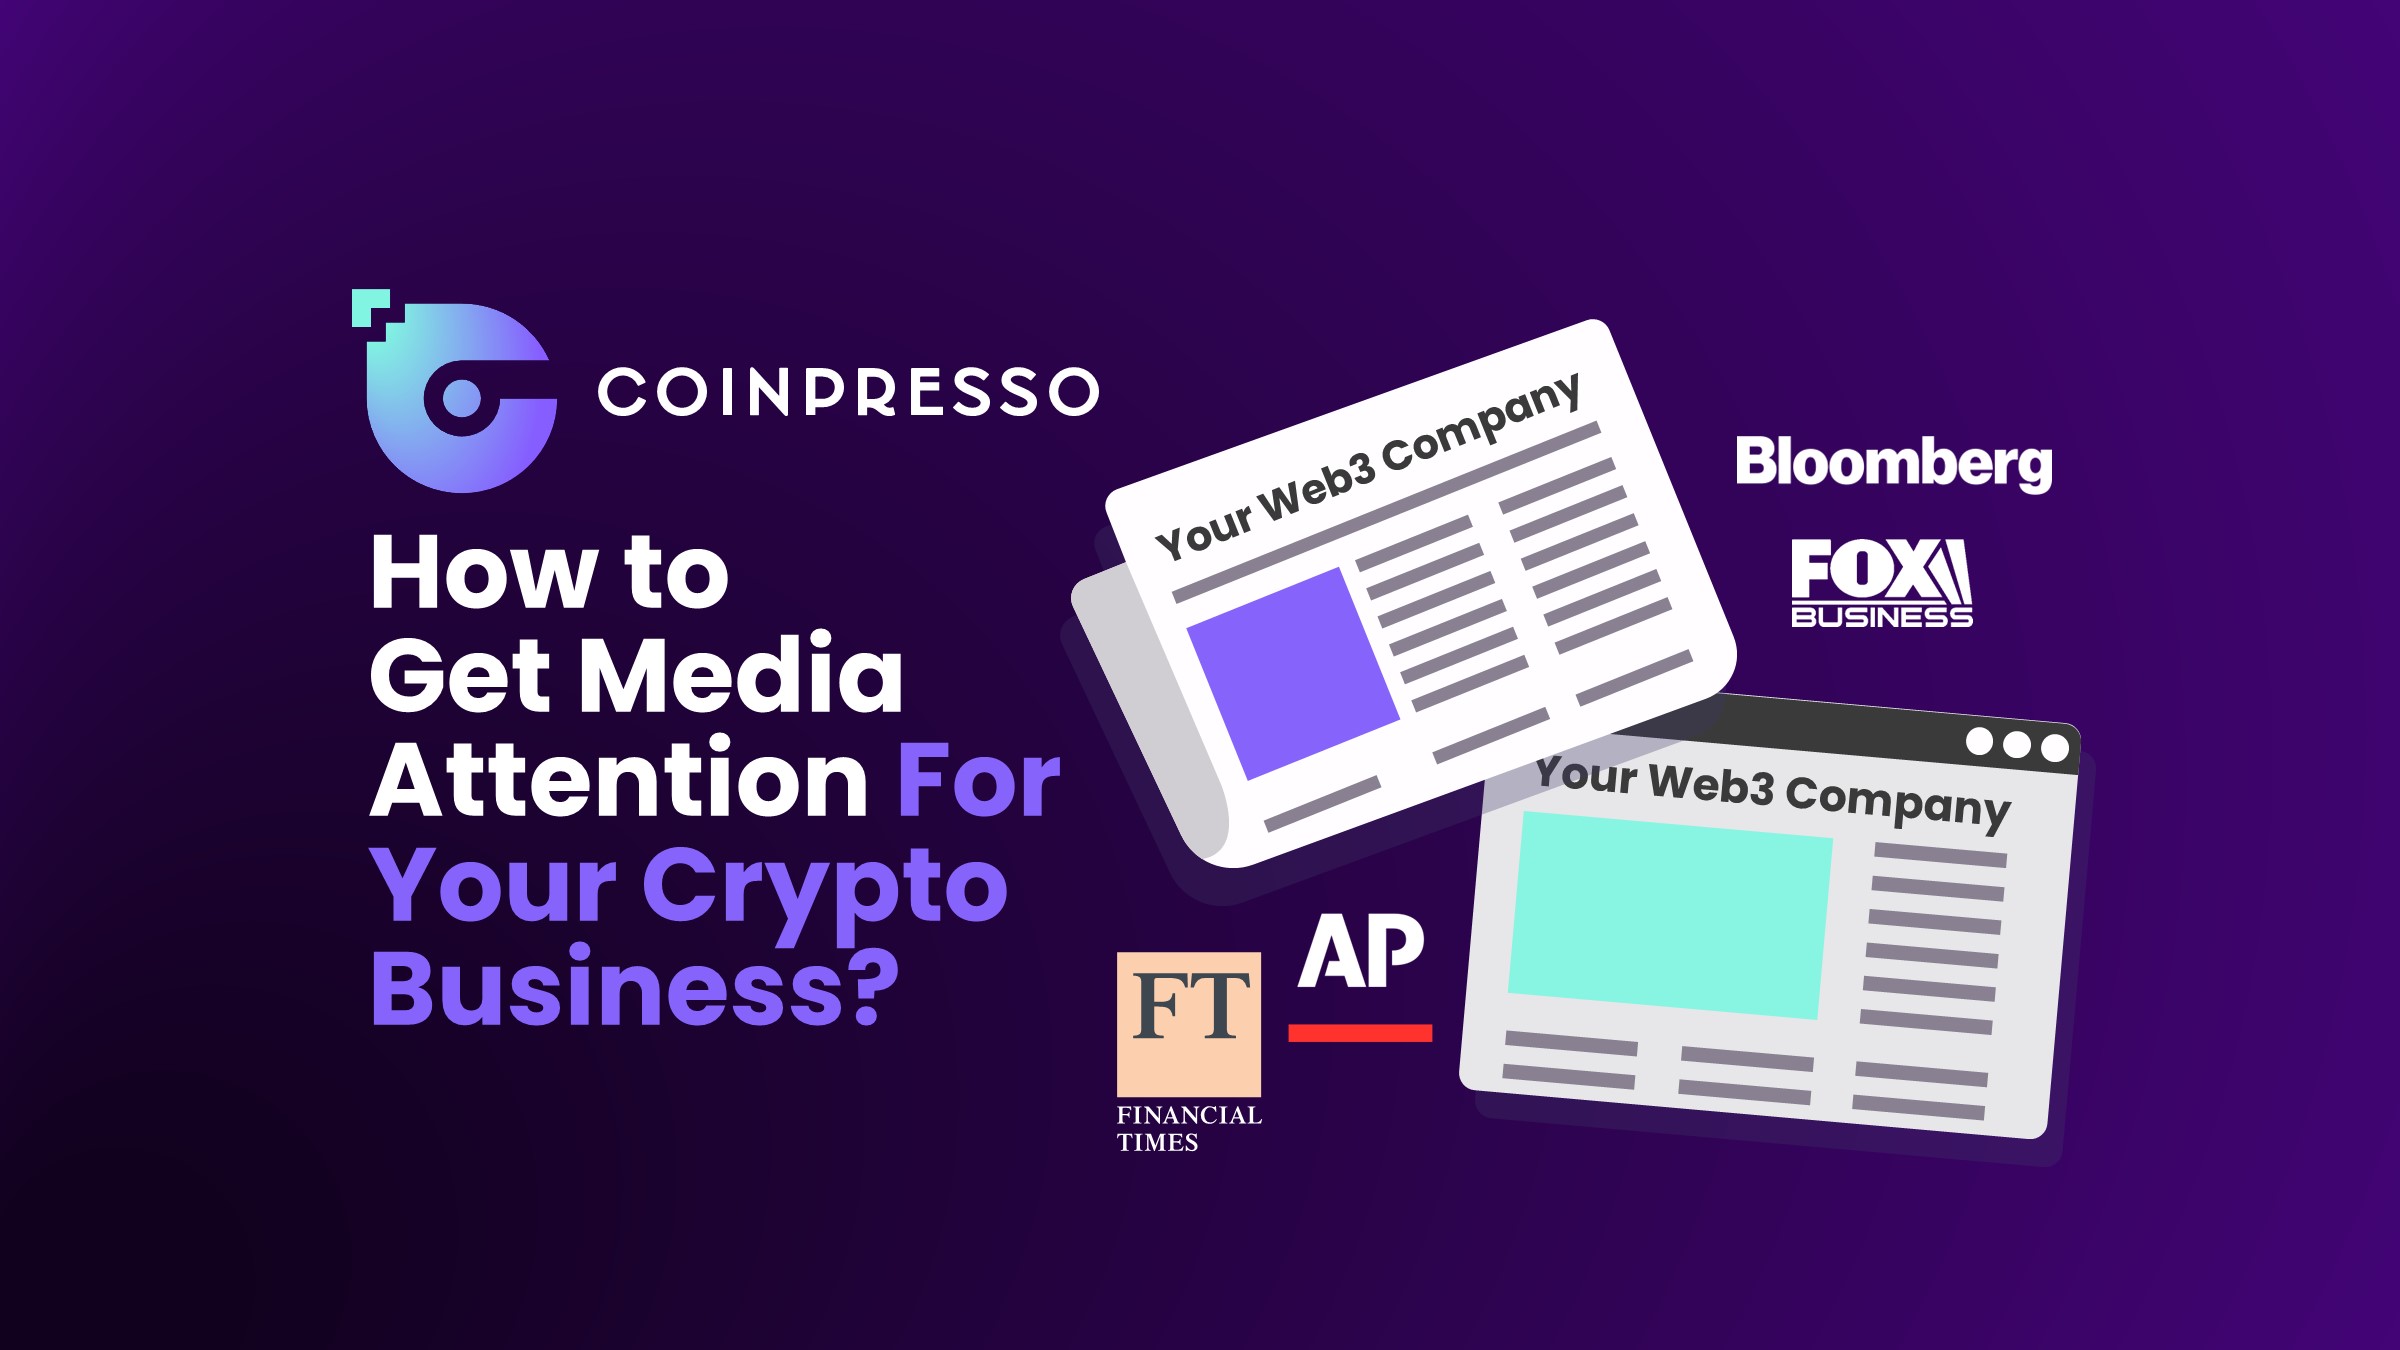 How to Get Media Attention For Your Crypto Business